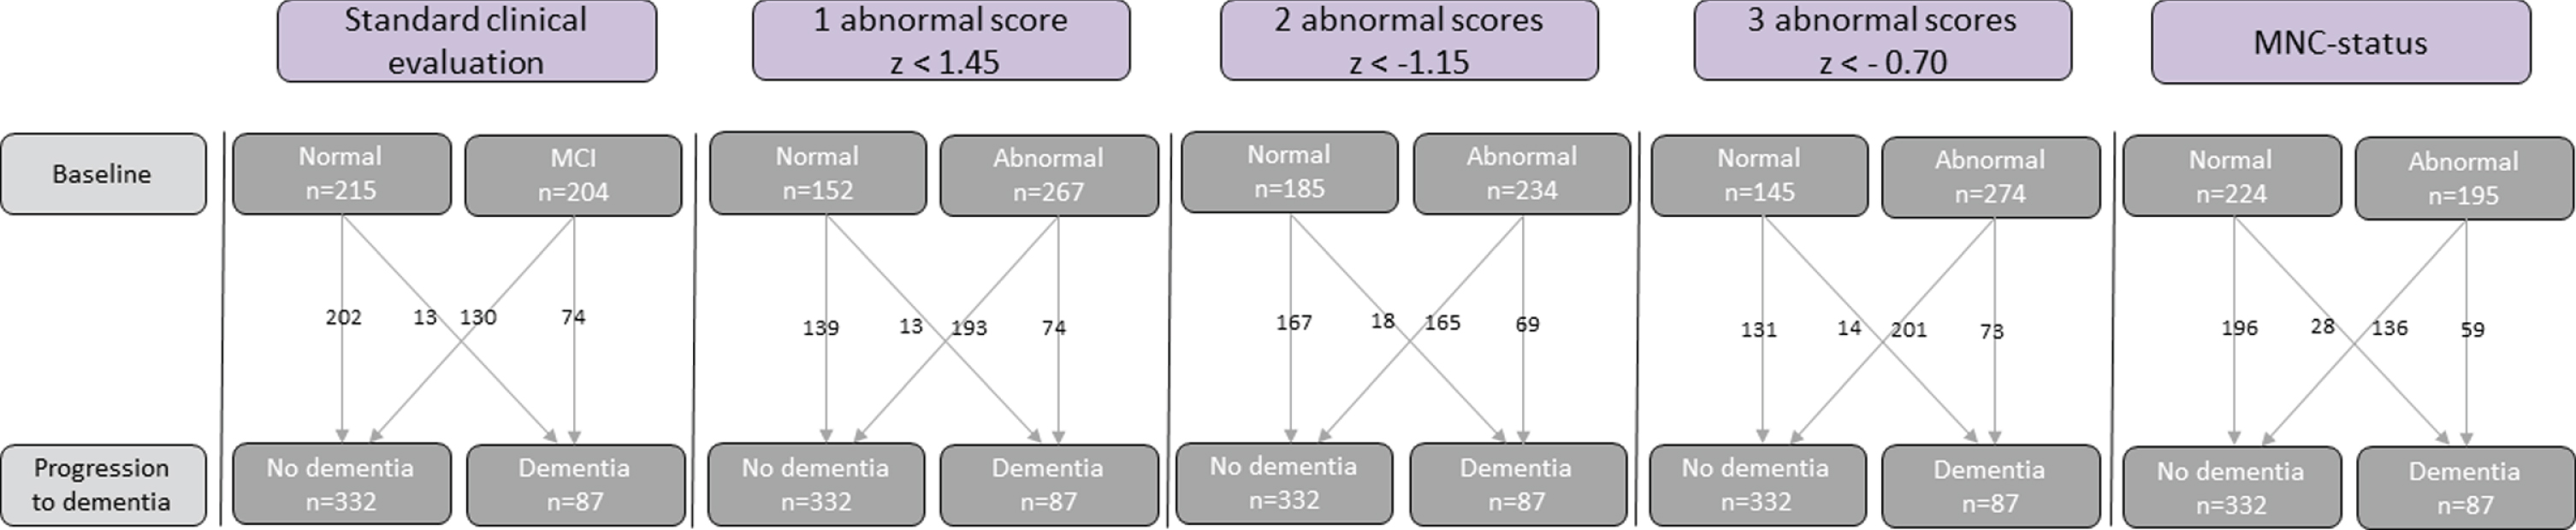 Classification of cognition by the five indicators of abnormal cognition: Conventional-MCI diagnosis, univariate cognitive status based on 1, 2, or 3 abnormal scores, and MNC status.